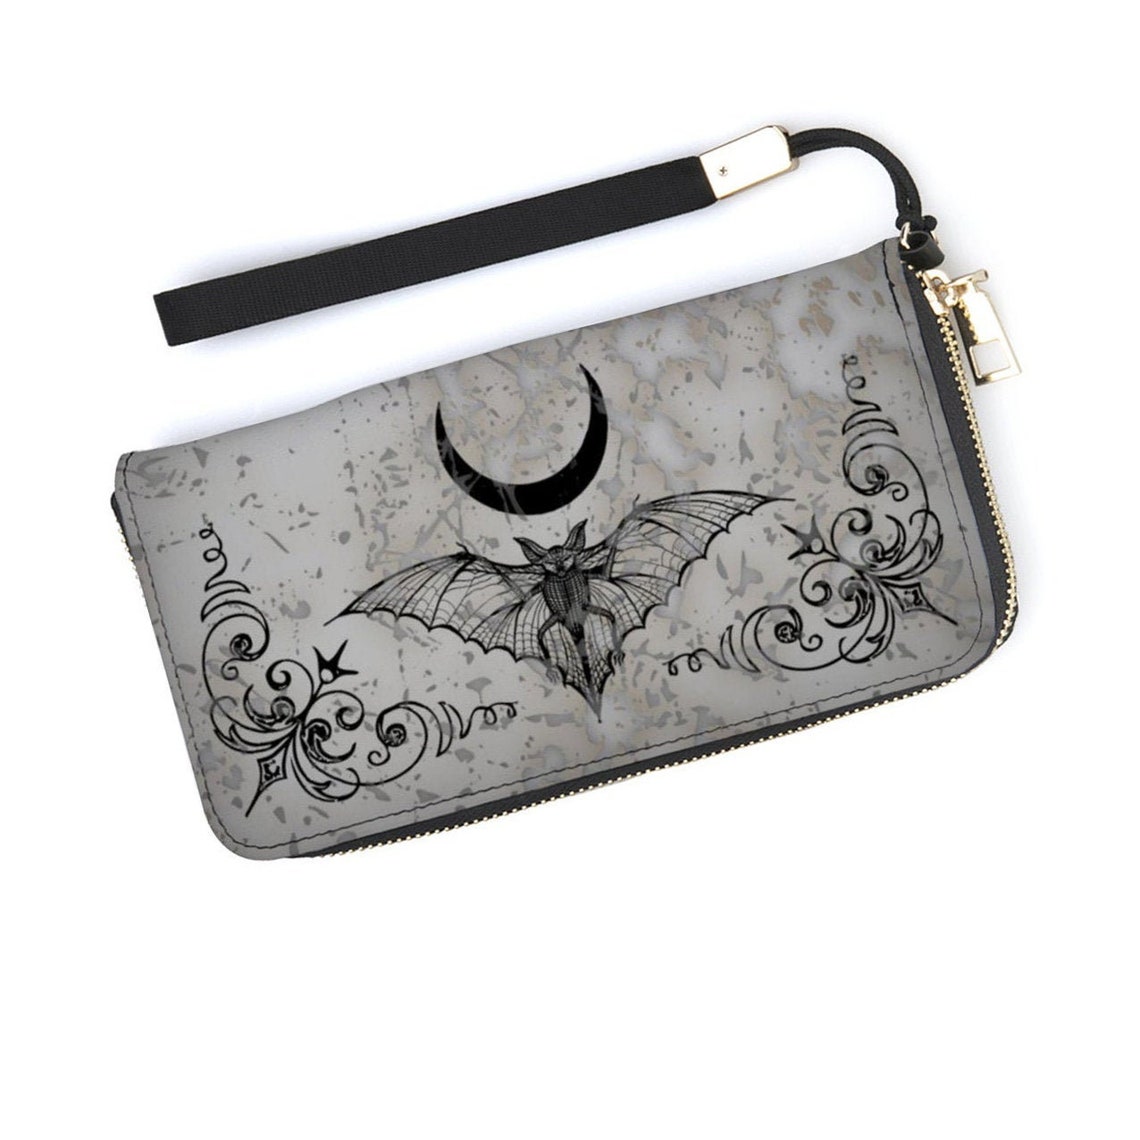 Bat Wallet - Victorian Gothic Purse - Gothic Wallet - ALTstyled - Breaking  Fashion with Alternative, Punk and Gothic Decor, Apparel and Accessories